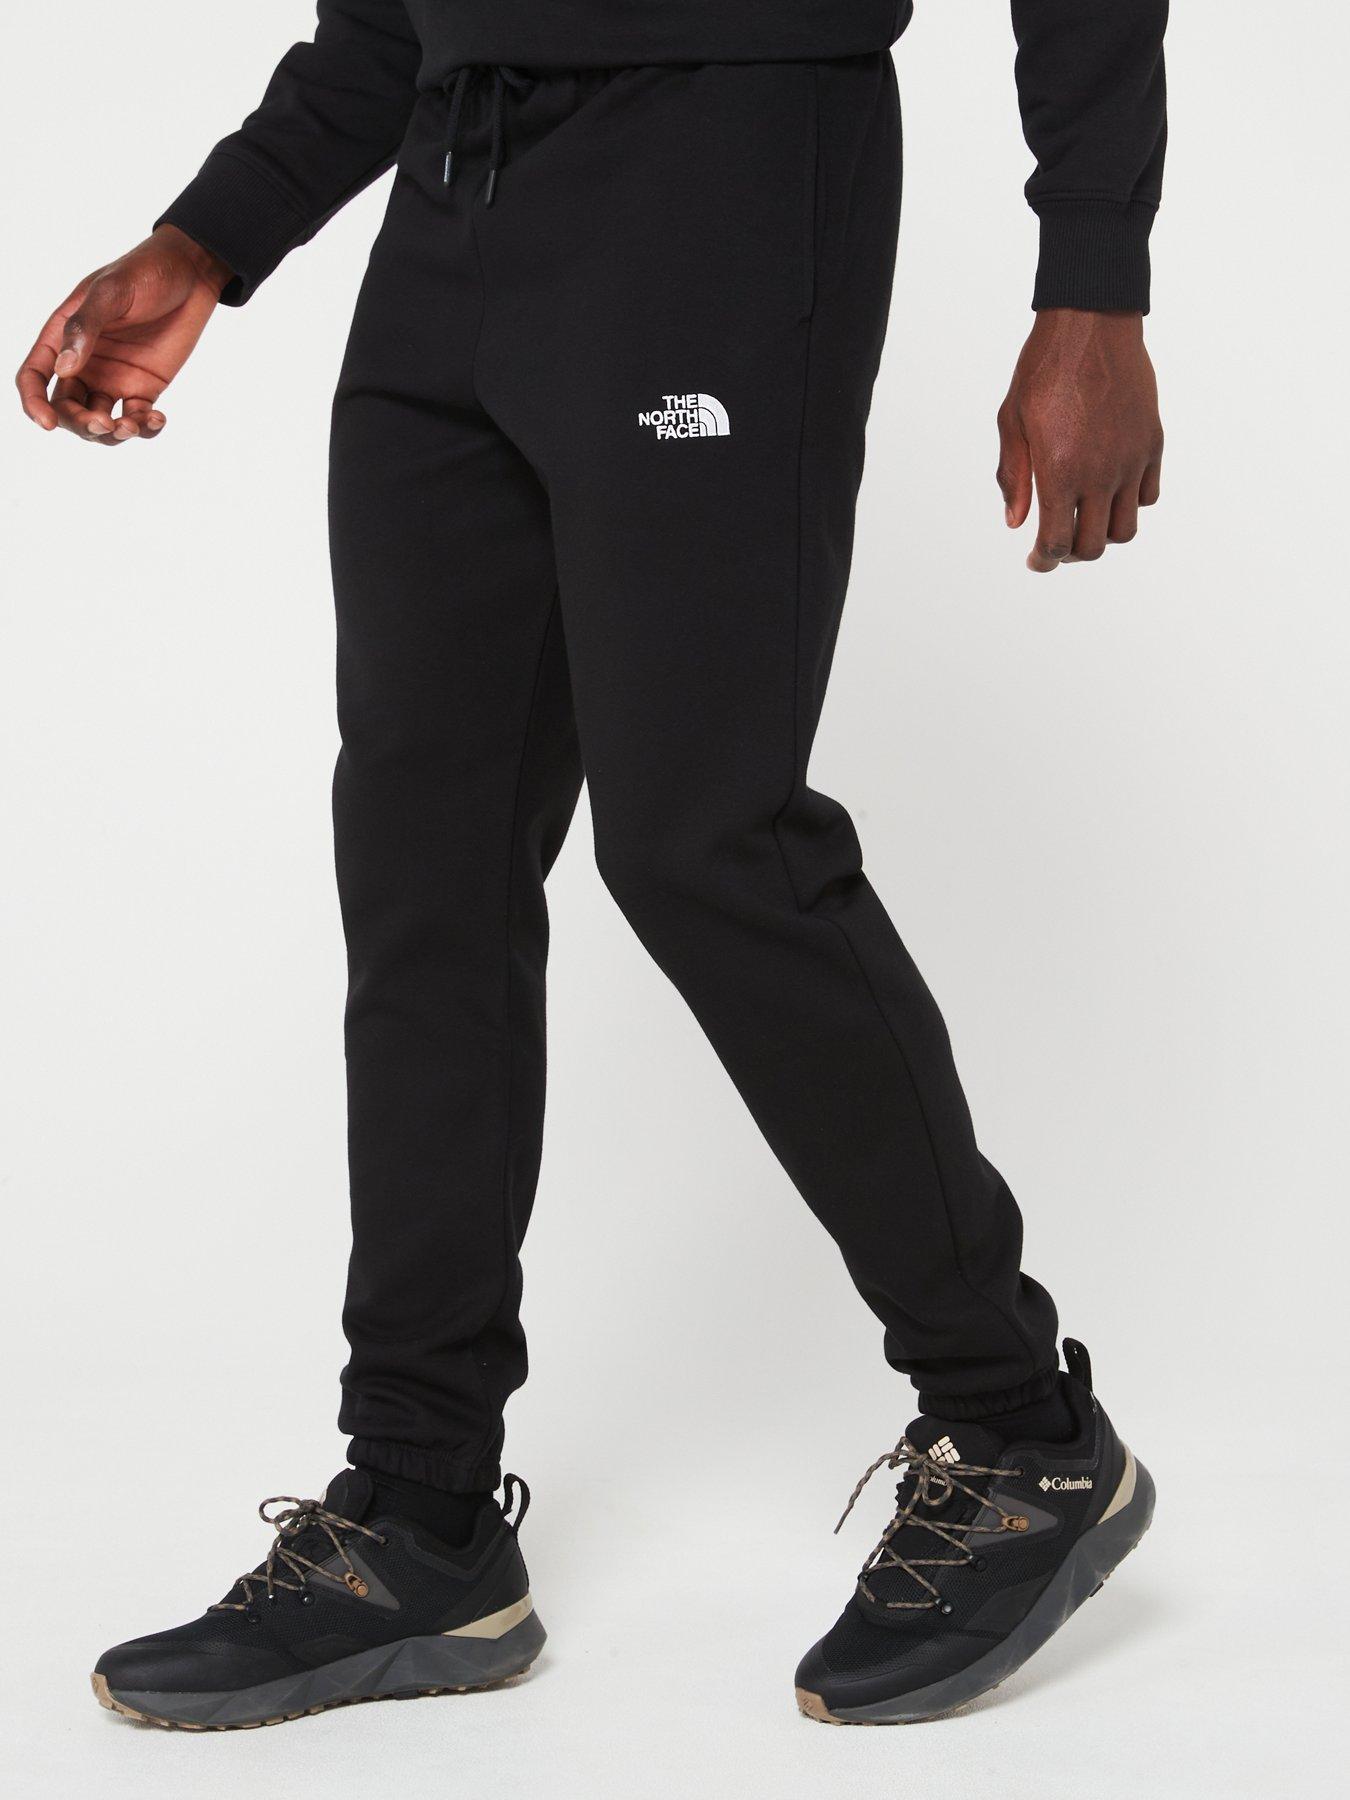 Real Essentials 3 Pack: Men's Tech Fleece Active Athletic Casual Jogger  Sweatpants with Pockets(Available In Big & Tall) 